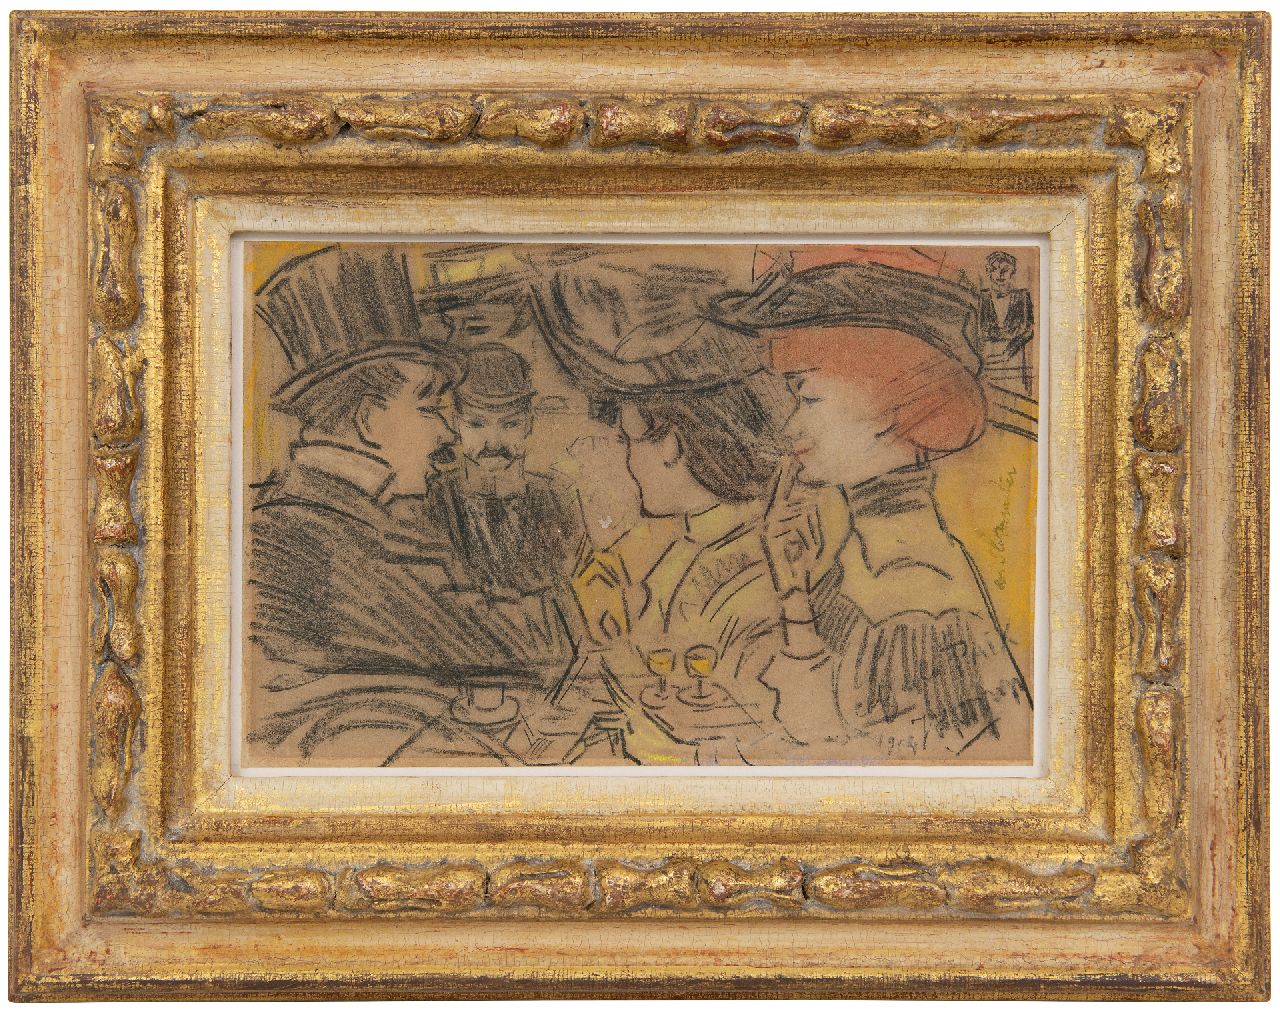 Toorop J.Th.  | Johannes Theodorus 'Jan' Toorop | Watercolours and drawings offered for sale | Elegant company in Café de la Paix, Paris, black and coloured chalk on paper 14.6 x 22.1 cm, signed l.r. and dated 1904